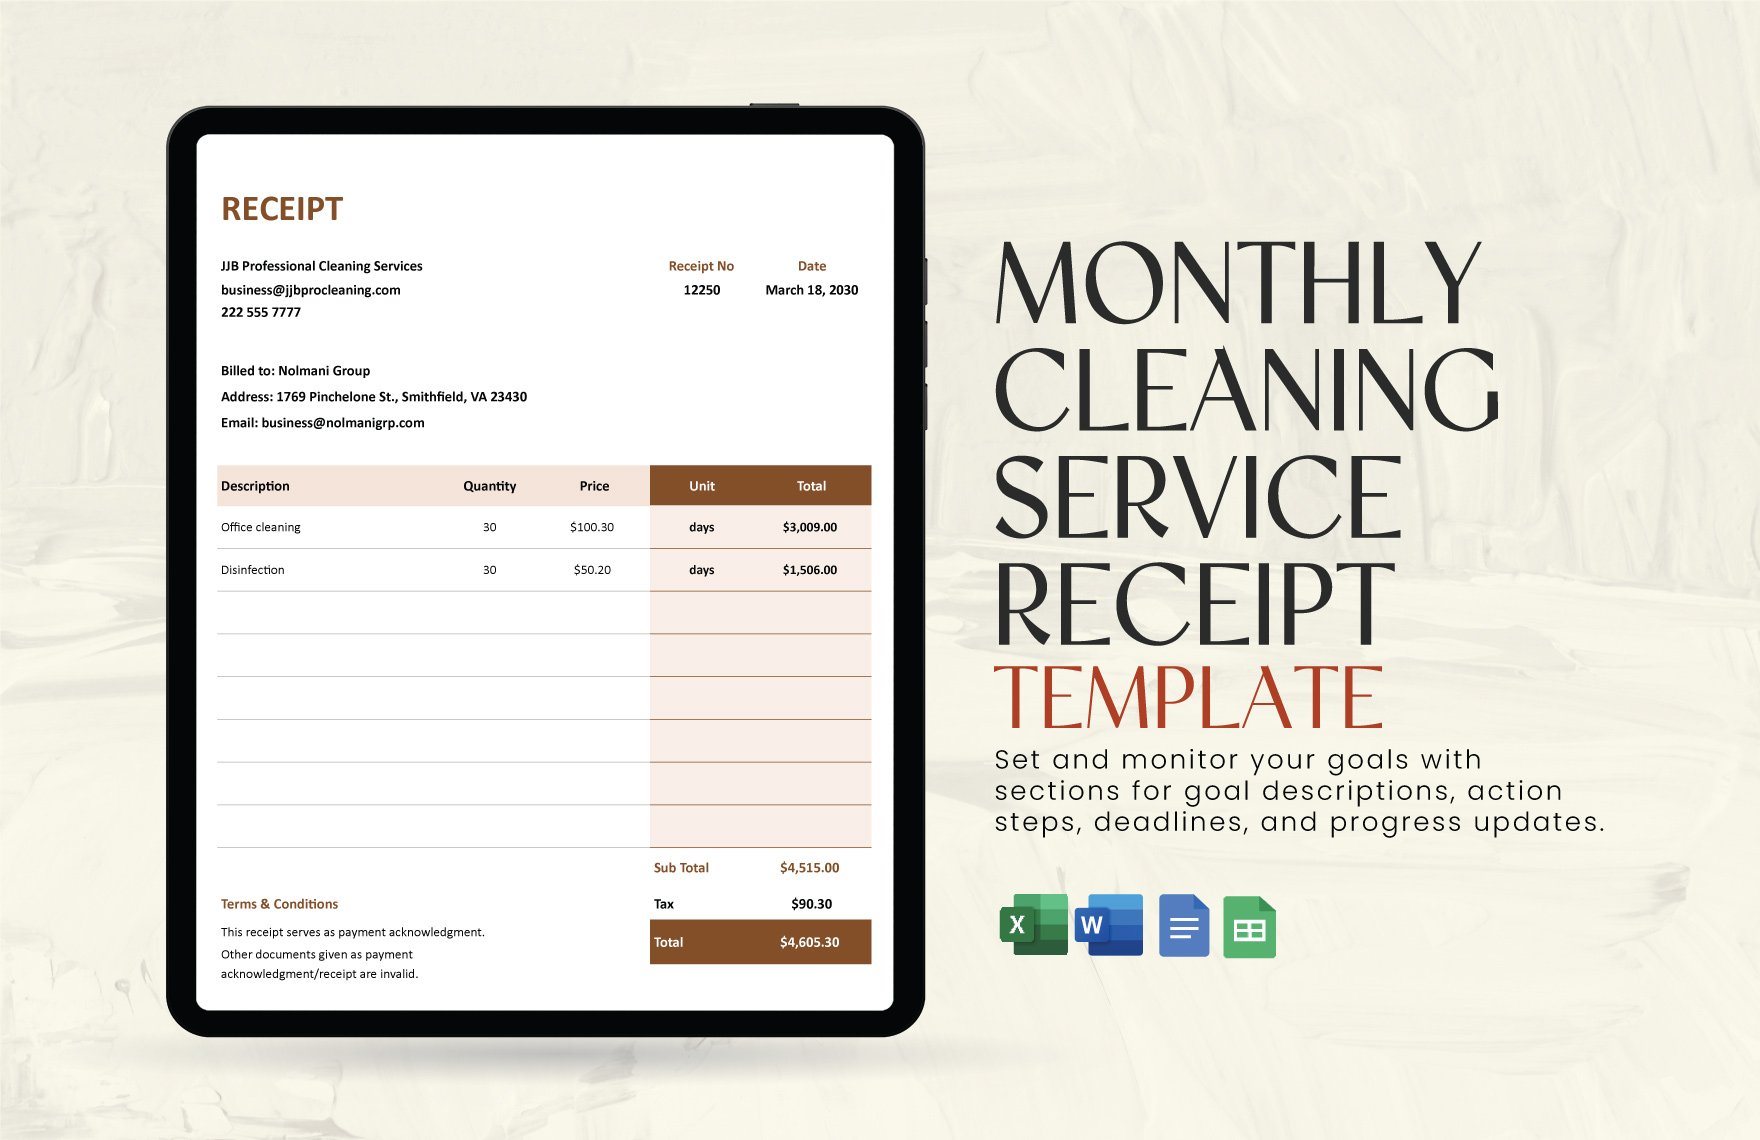 Monthly Cleaning Service Receipt Template in Word, Google Docs, Excel, Google Sheets